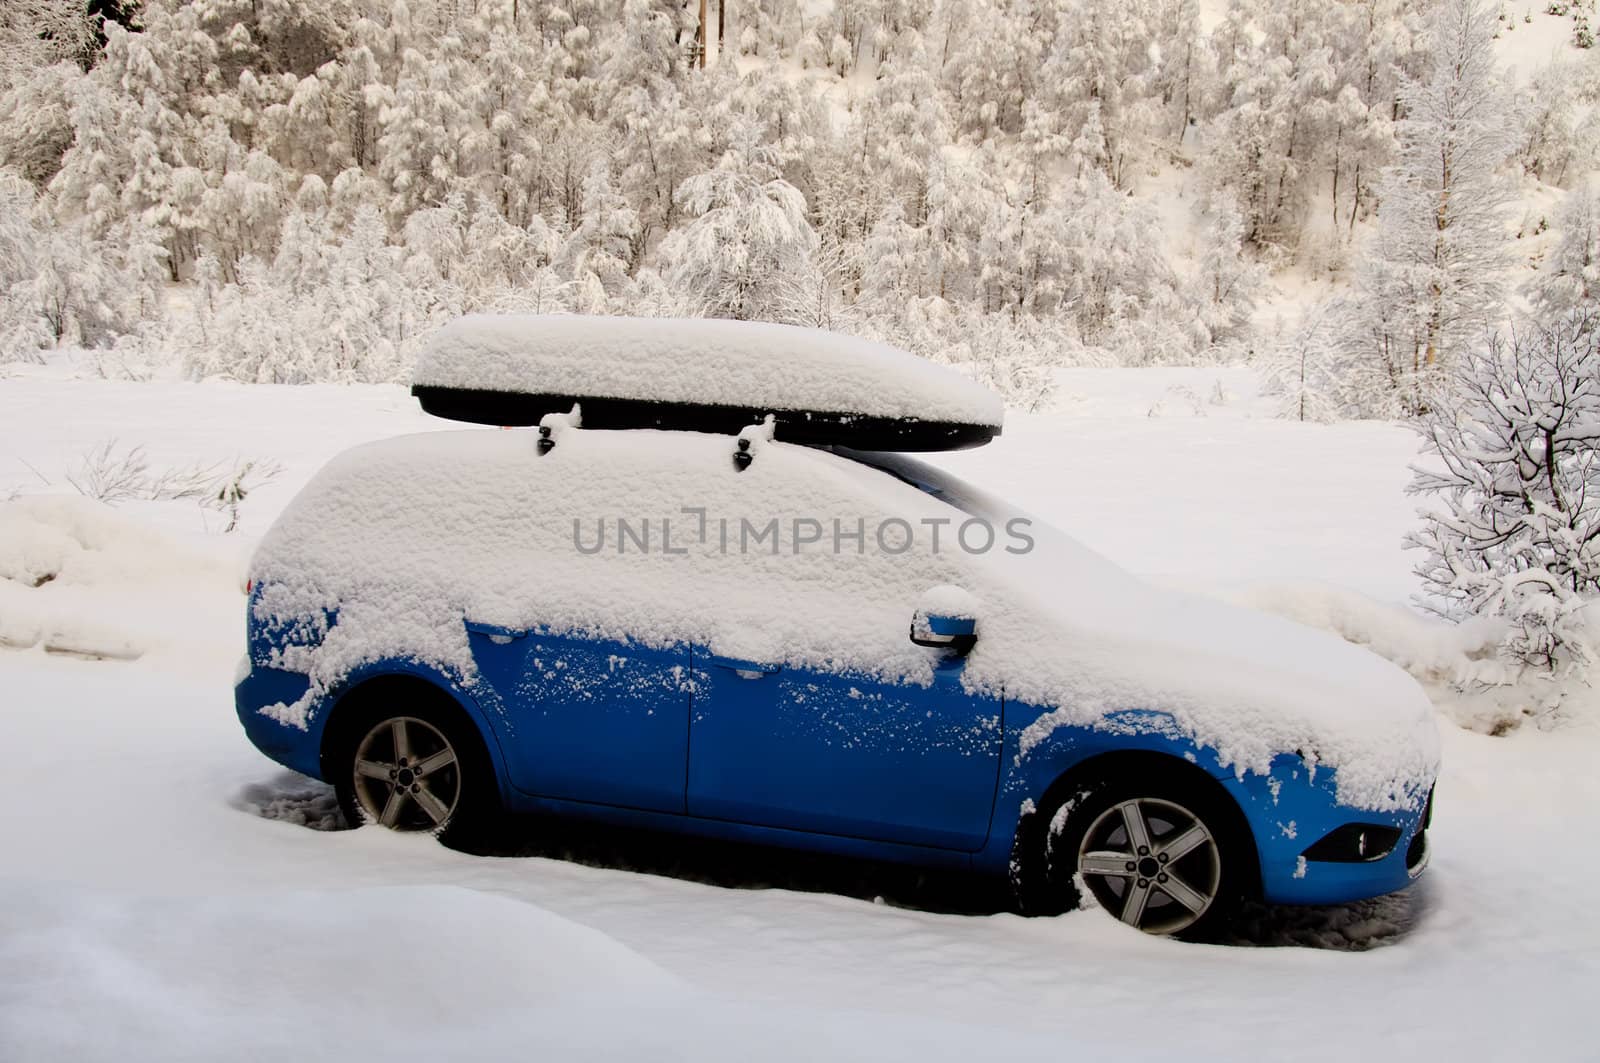 A blue car covered in snow in the forest